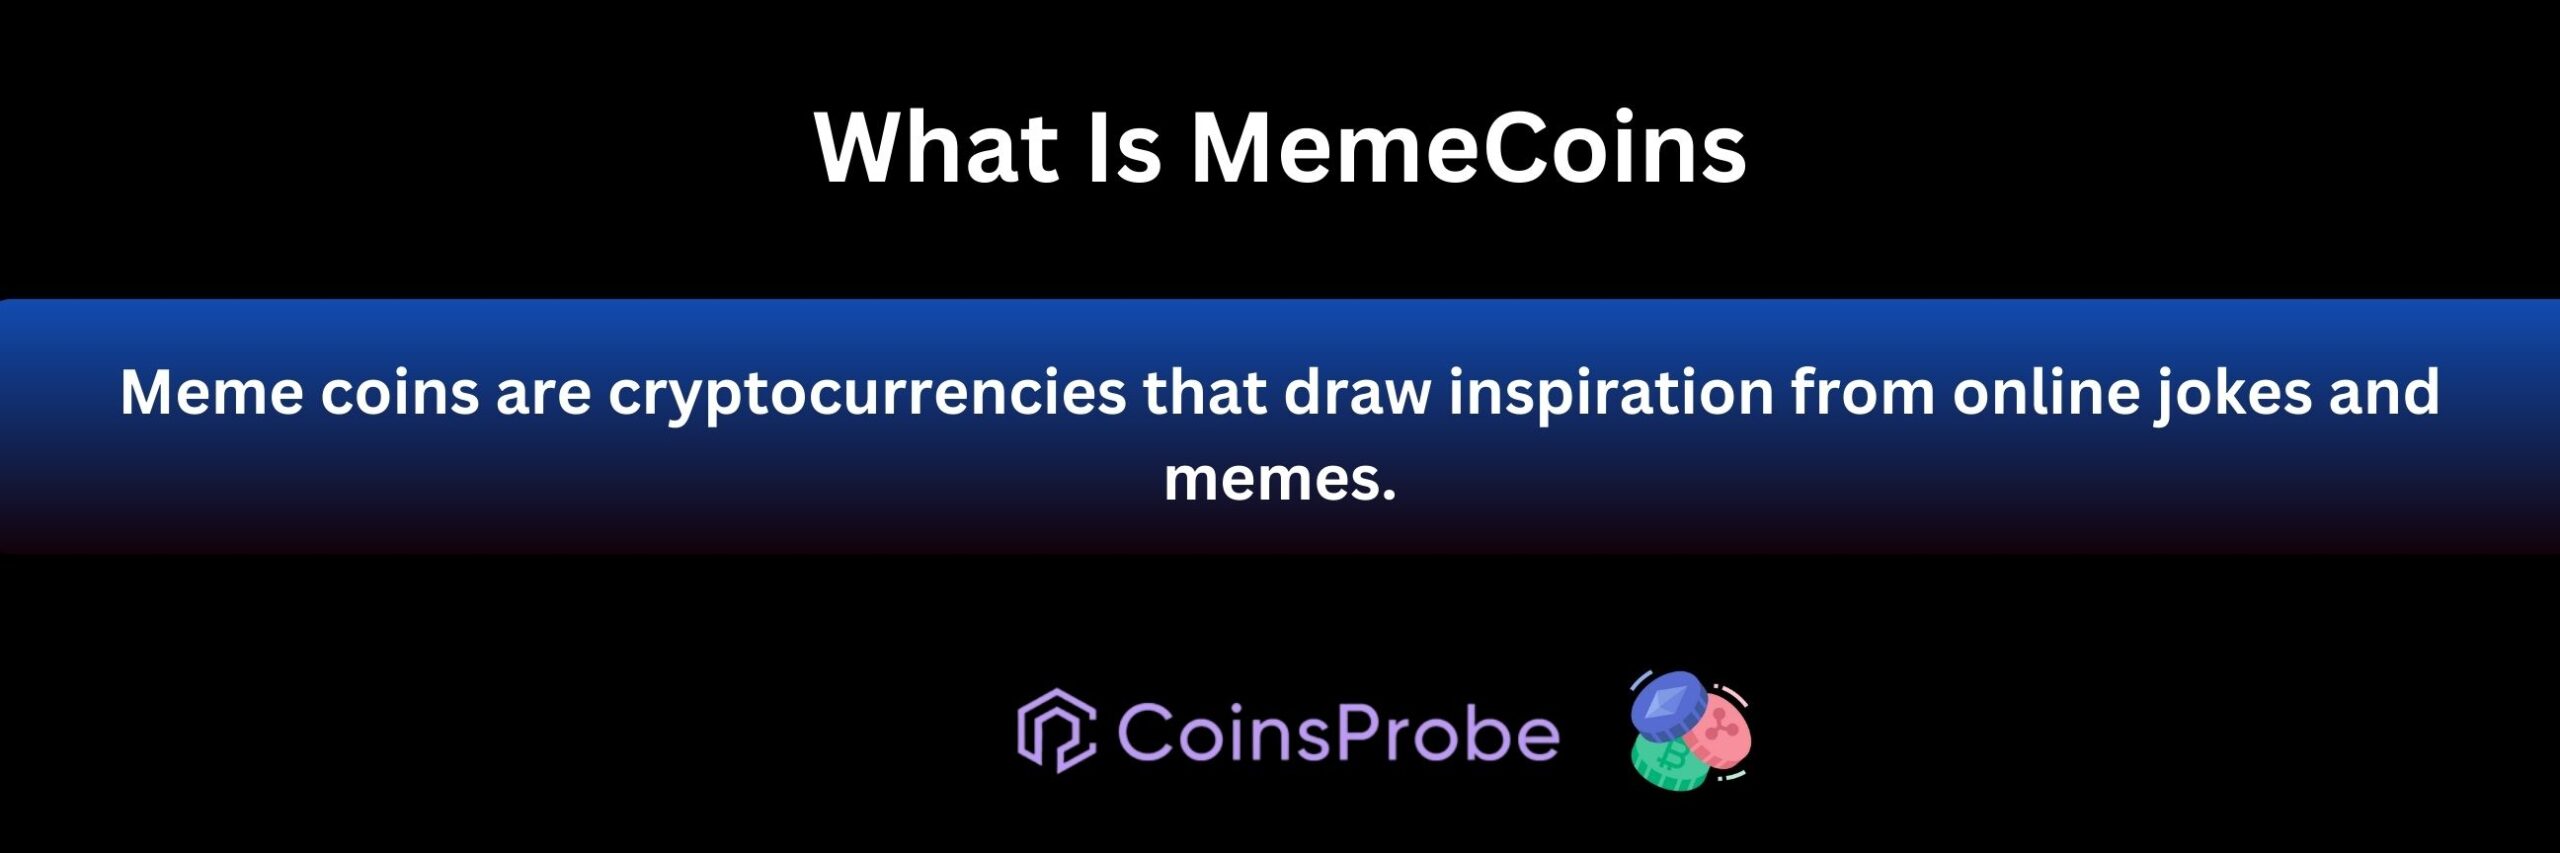 What Is MemeCoins